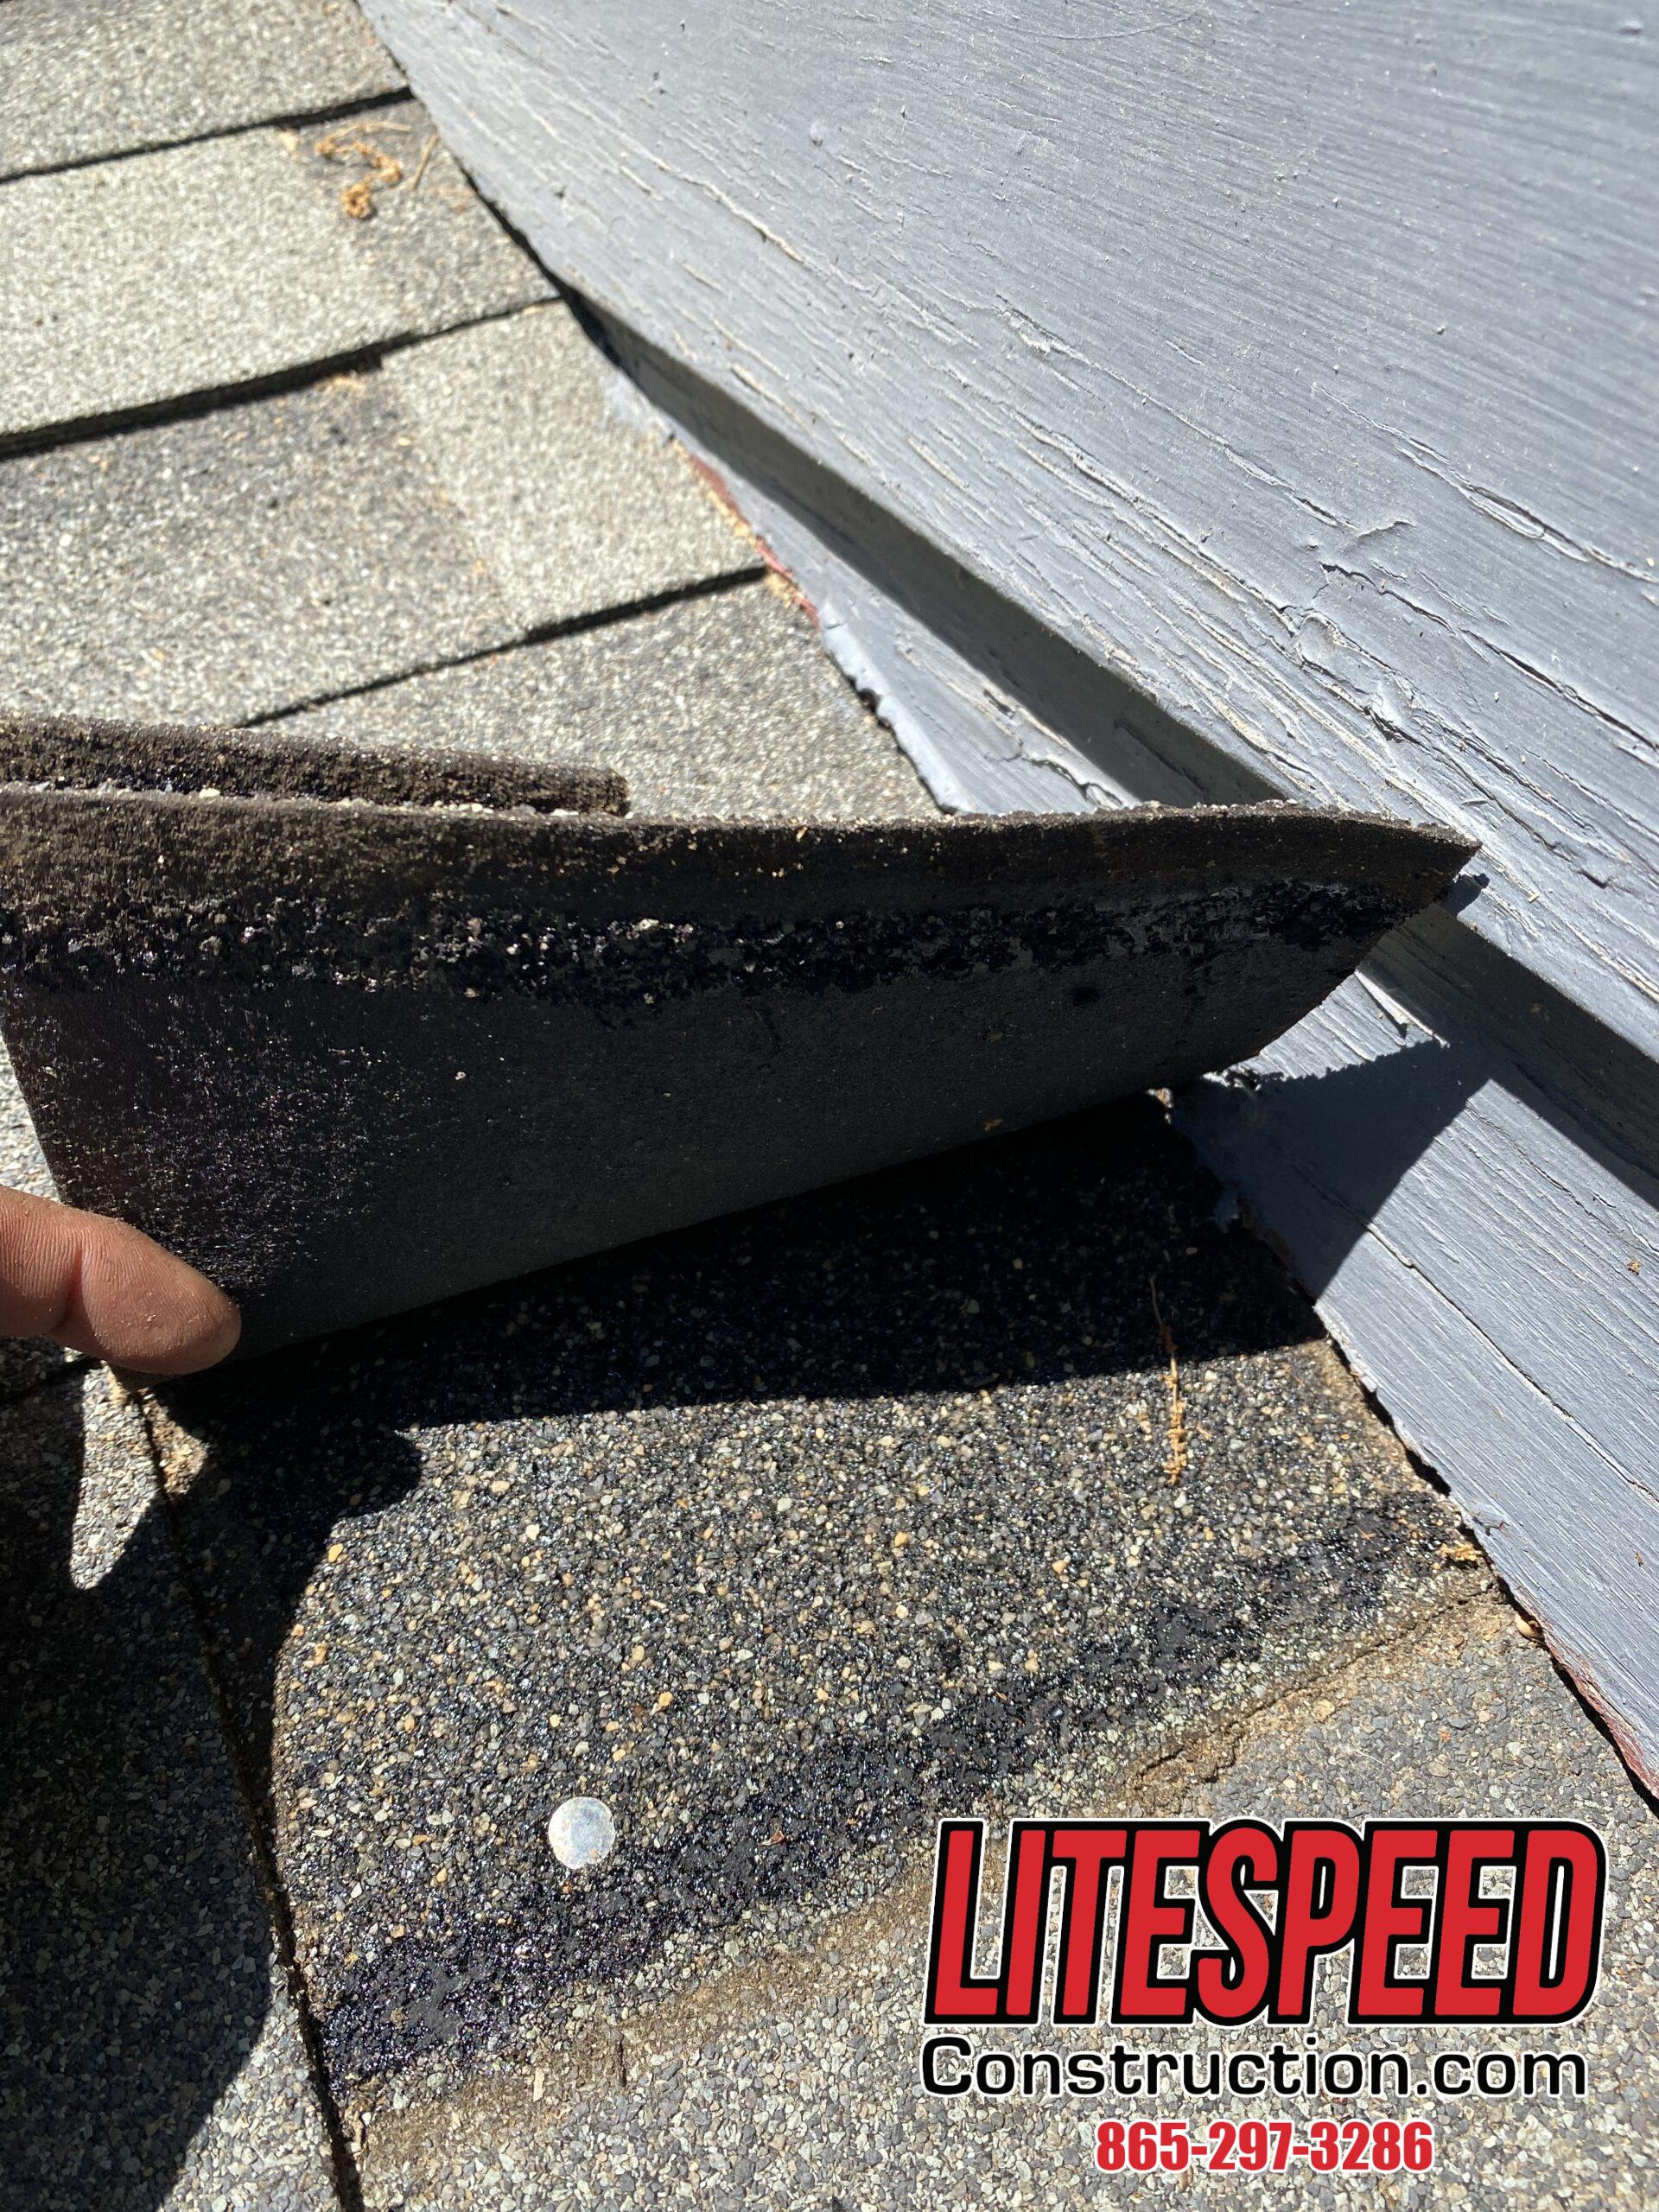 This is a picture of a lifted shingle at a wall with no step flashing underneath